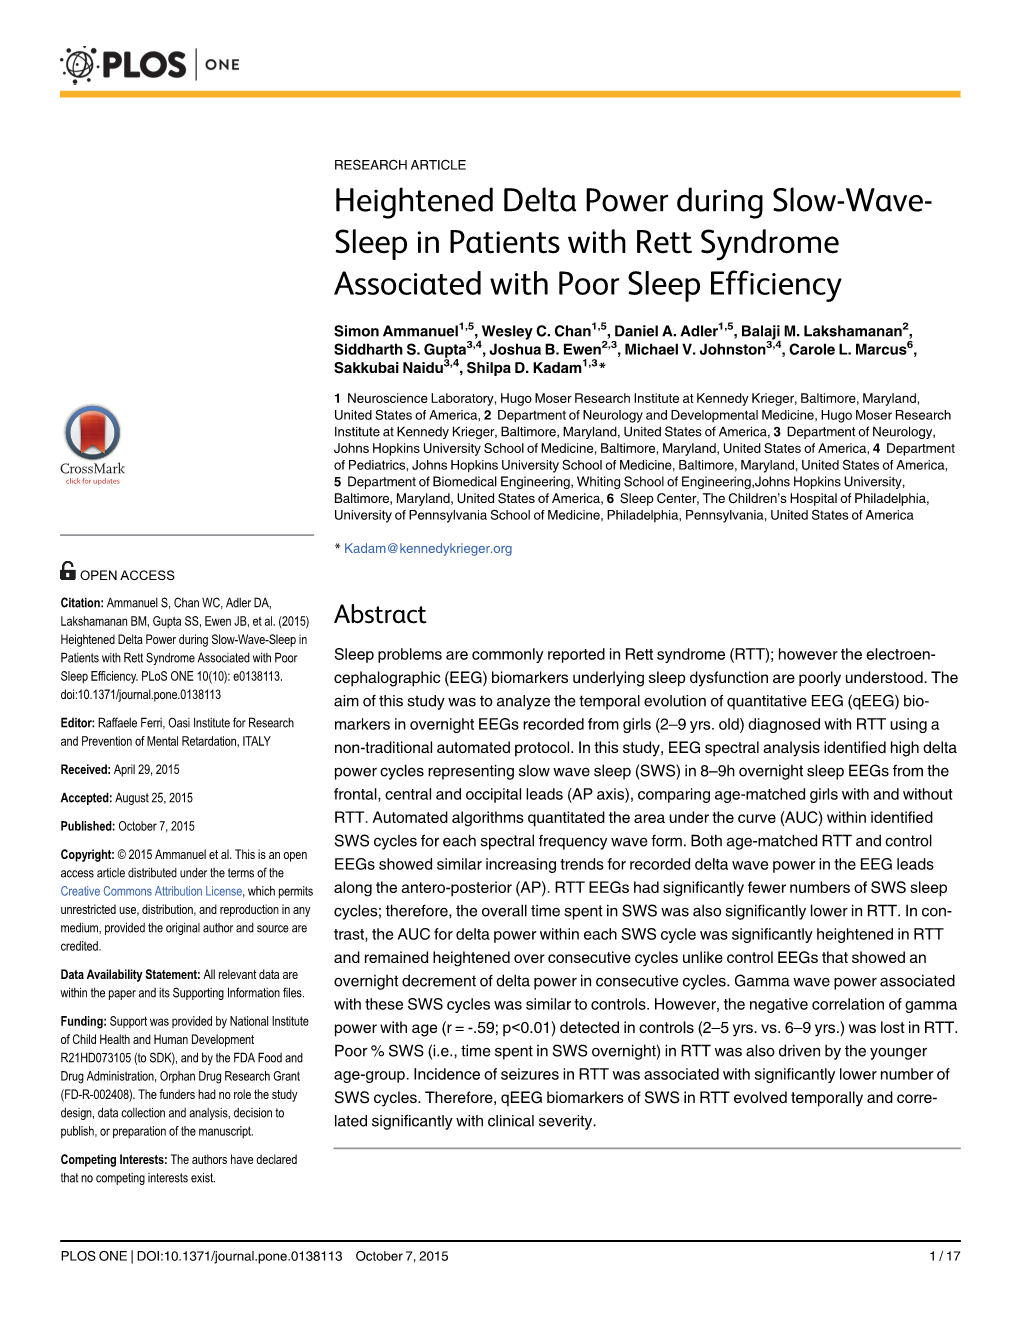 Heightened Delta Power During Slow-Wave- Sleep in Patients with Rett Syndrome Associated with Poor Sleep Efficiency